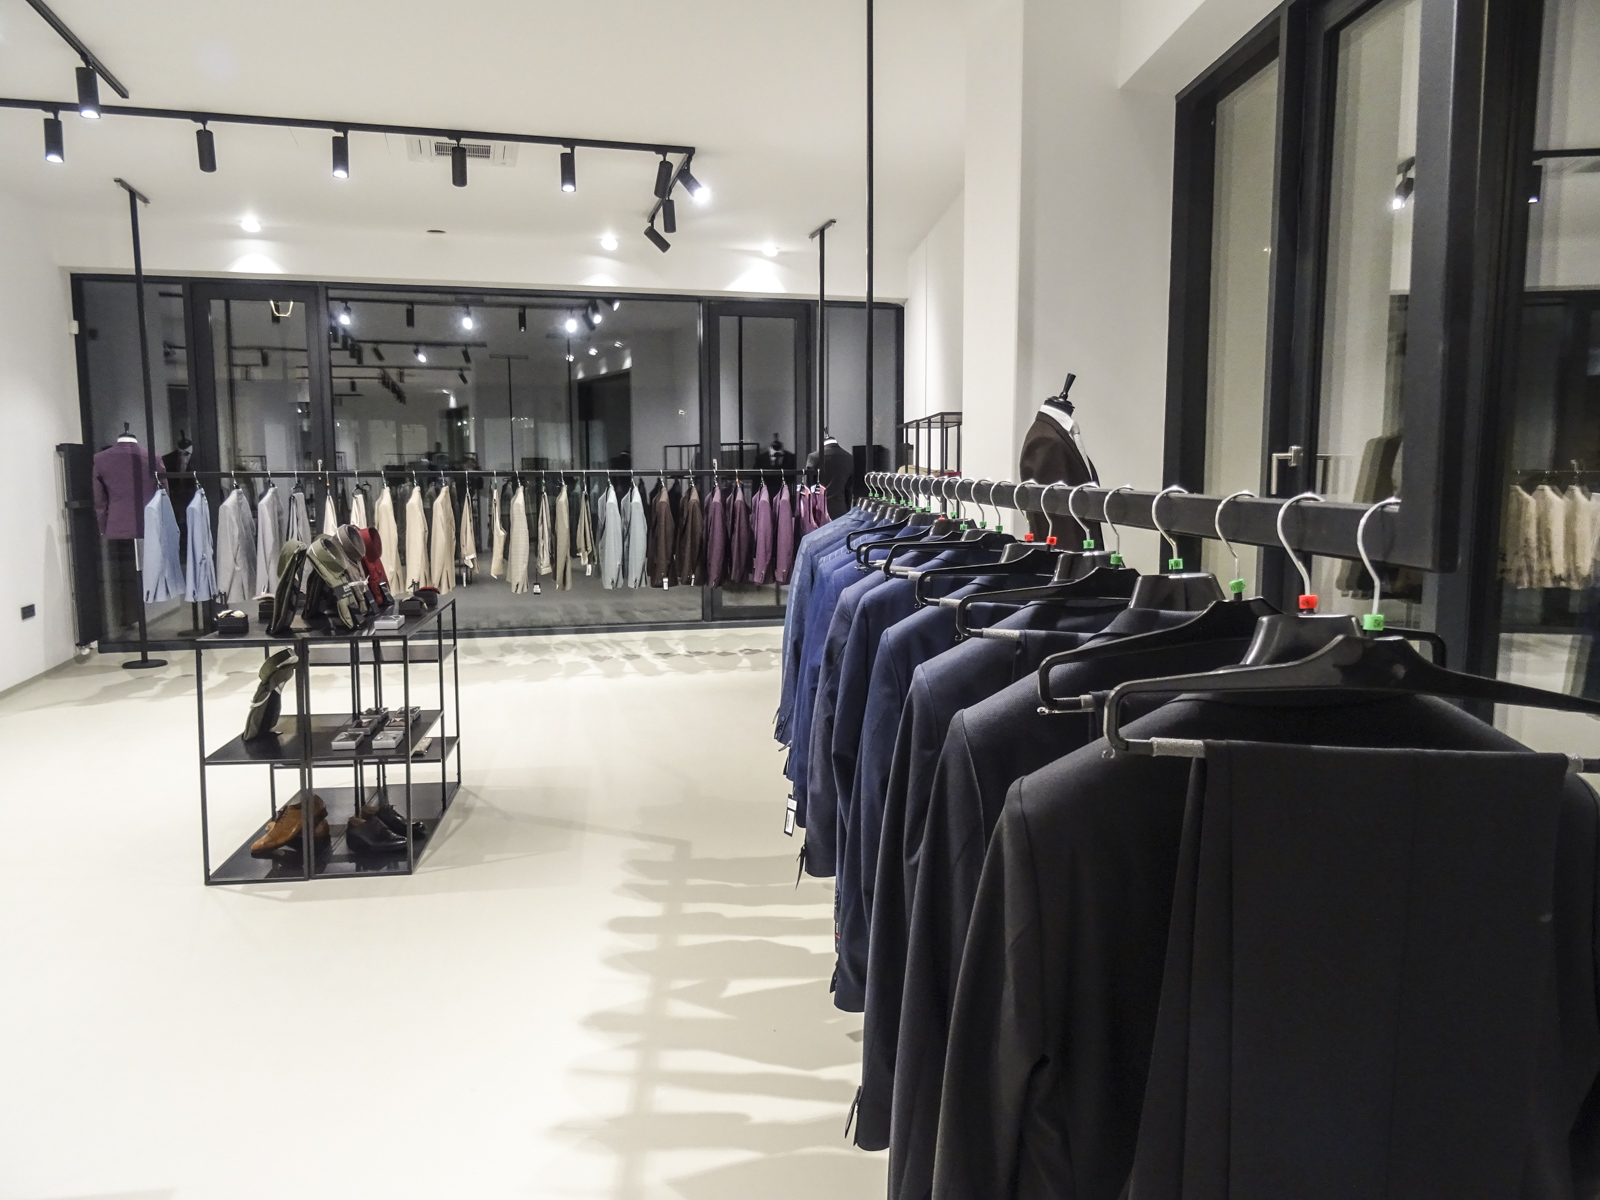 LED lighting in a stylish shop with men's suits